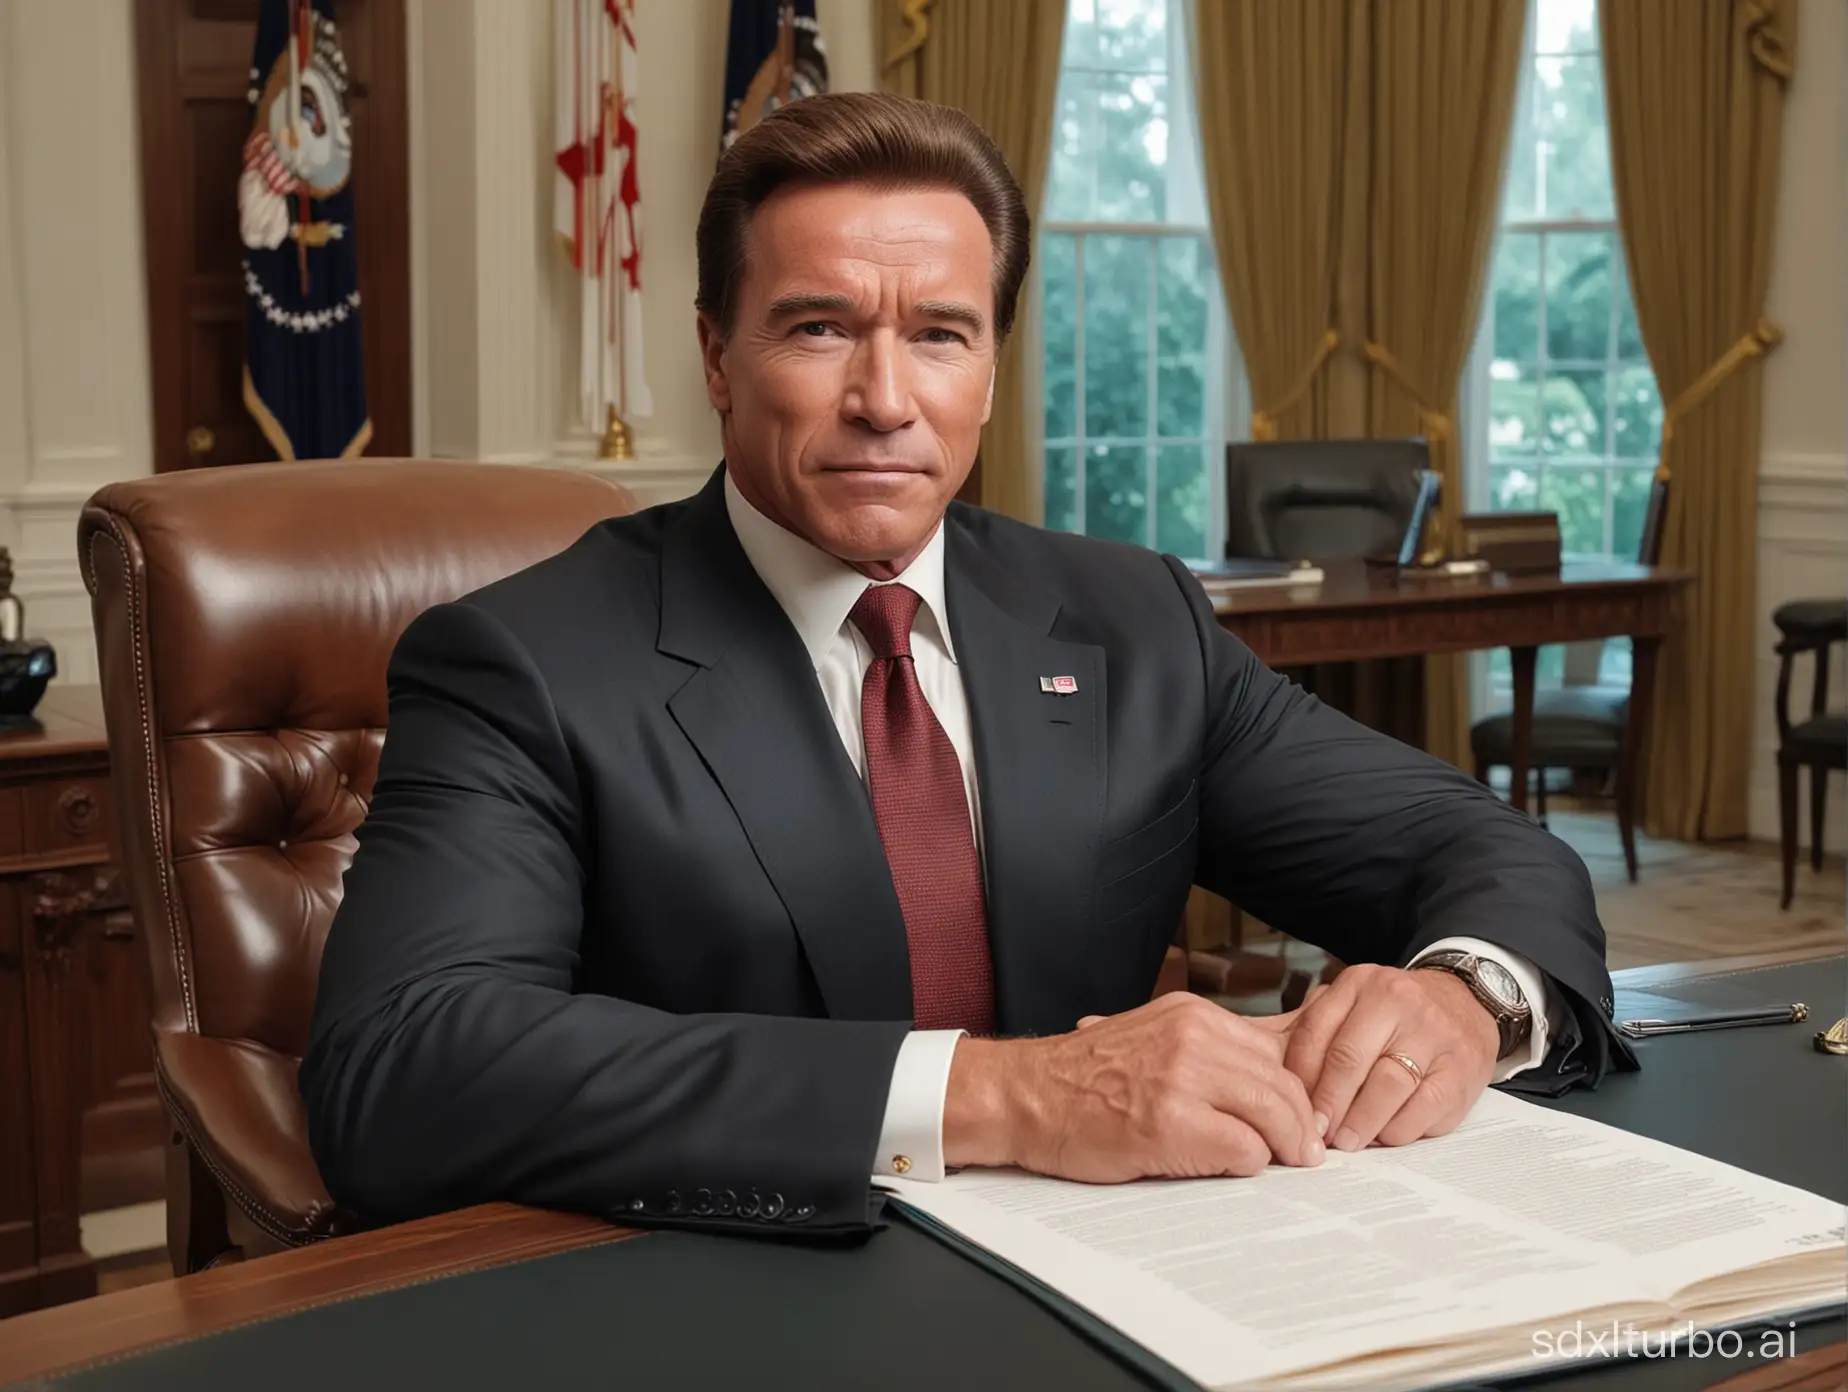 Arnold  Schwarzenegger as president sitting in the oval officecof the whitehouse extremely photo realistic imaging.